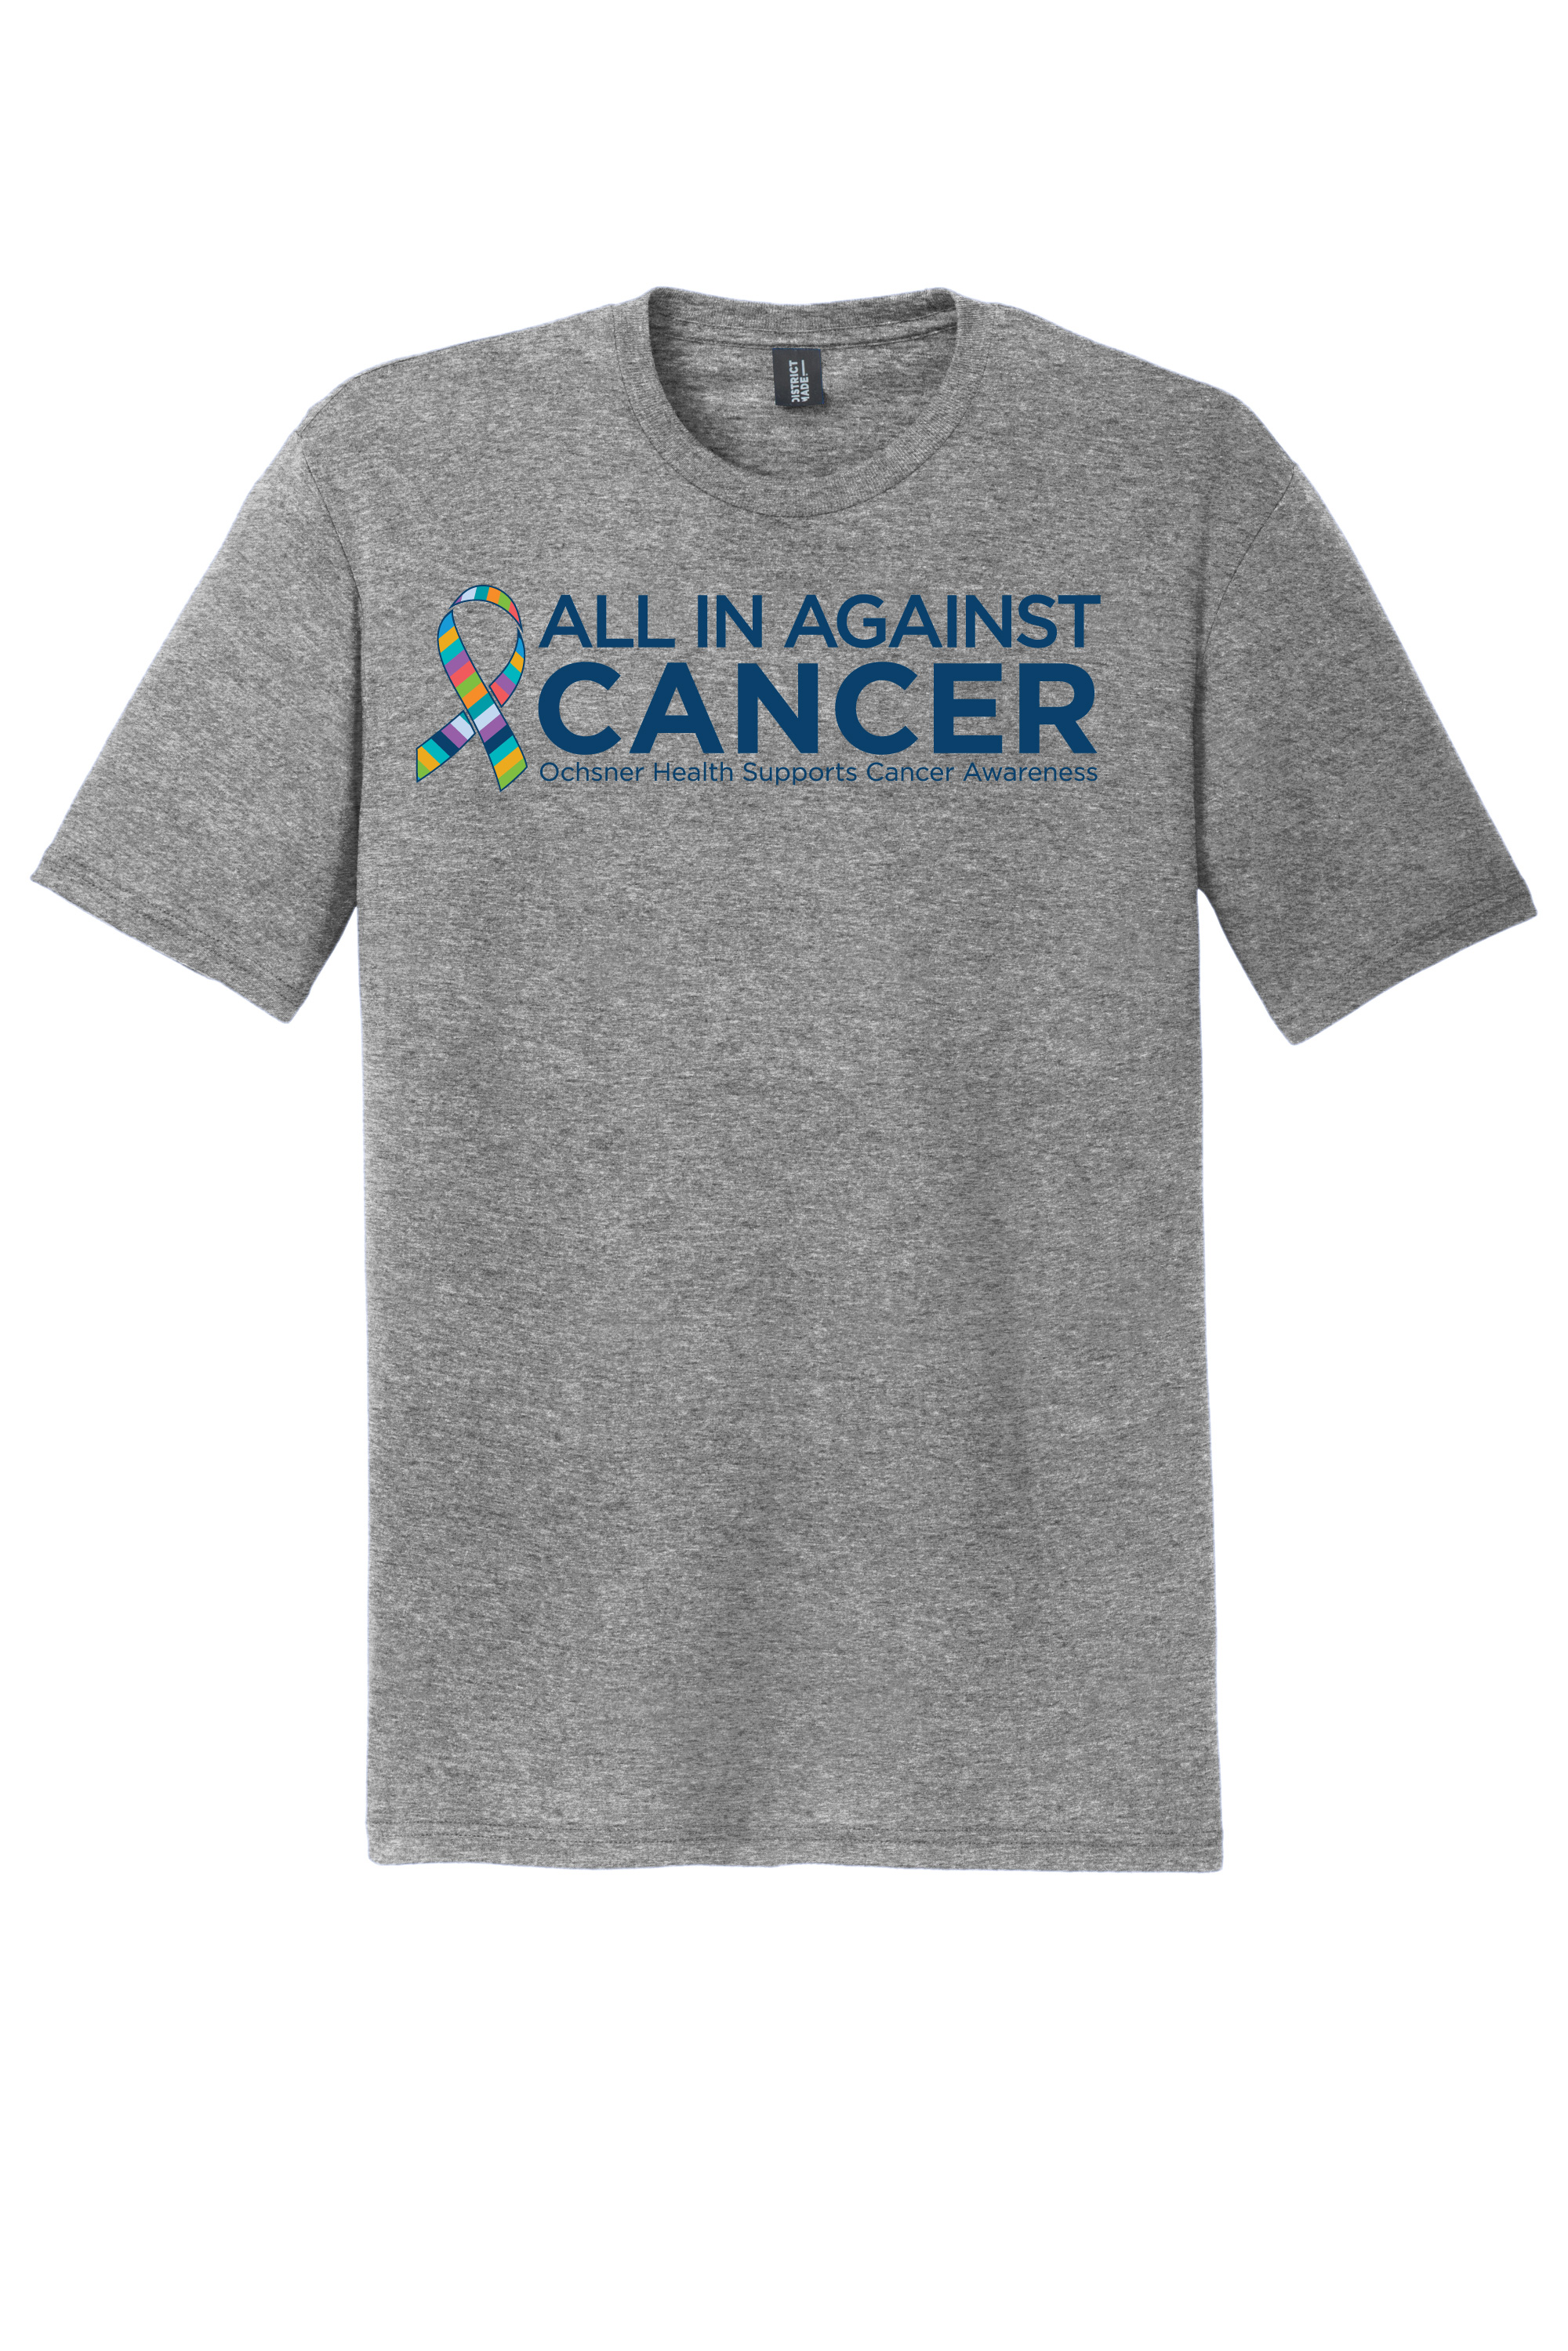 All in Against Cancer Unisex T-Shirt, , large image number 1